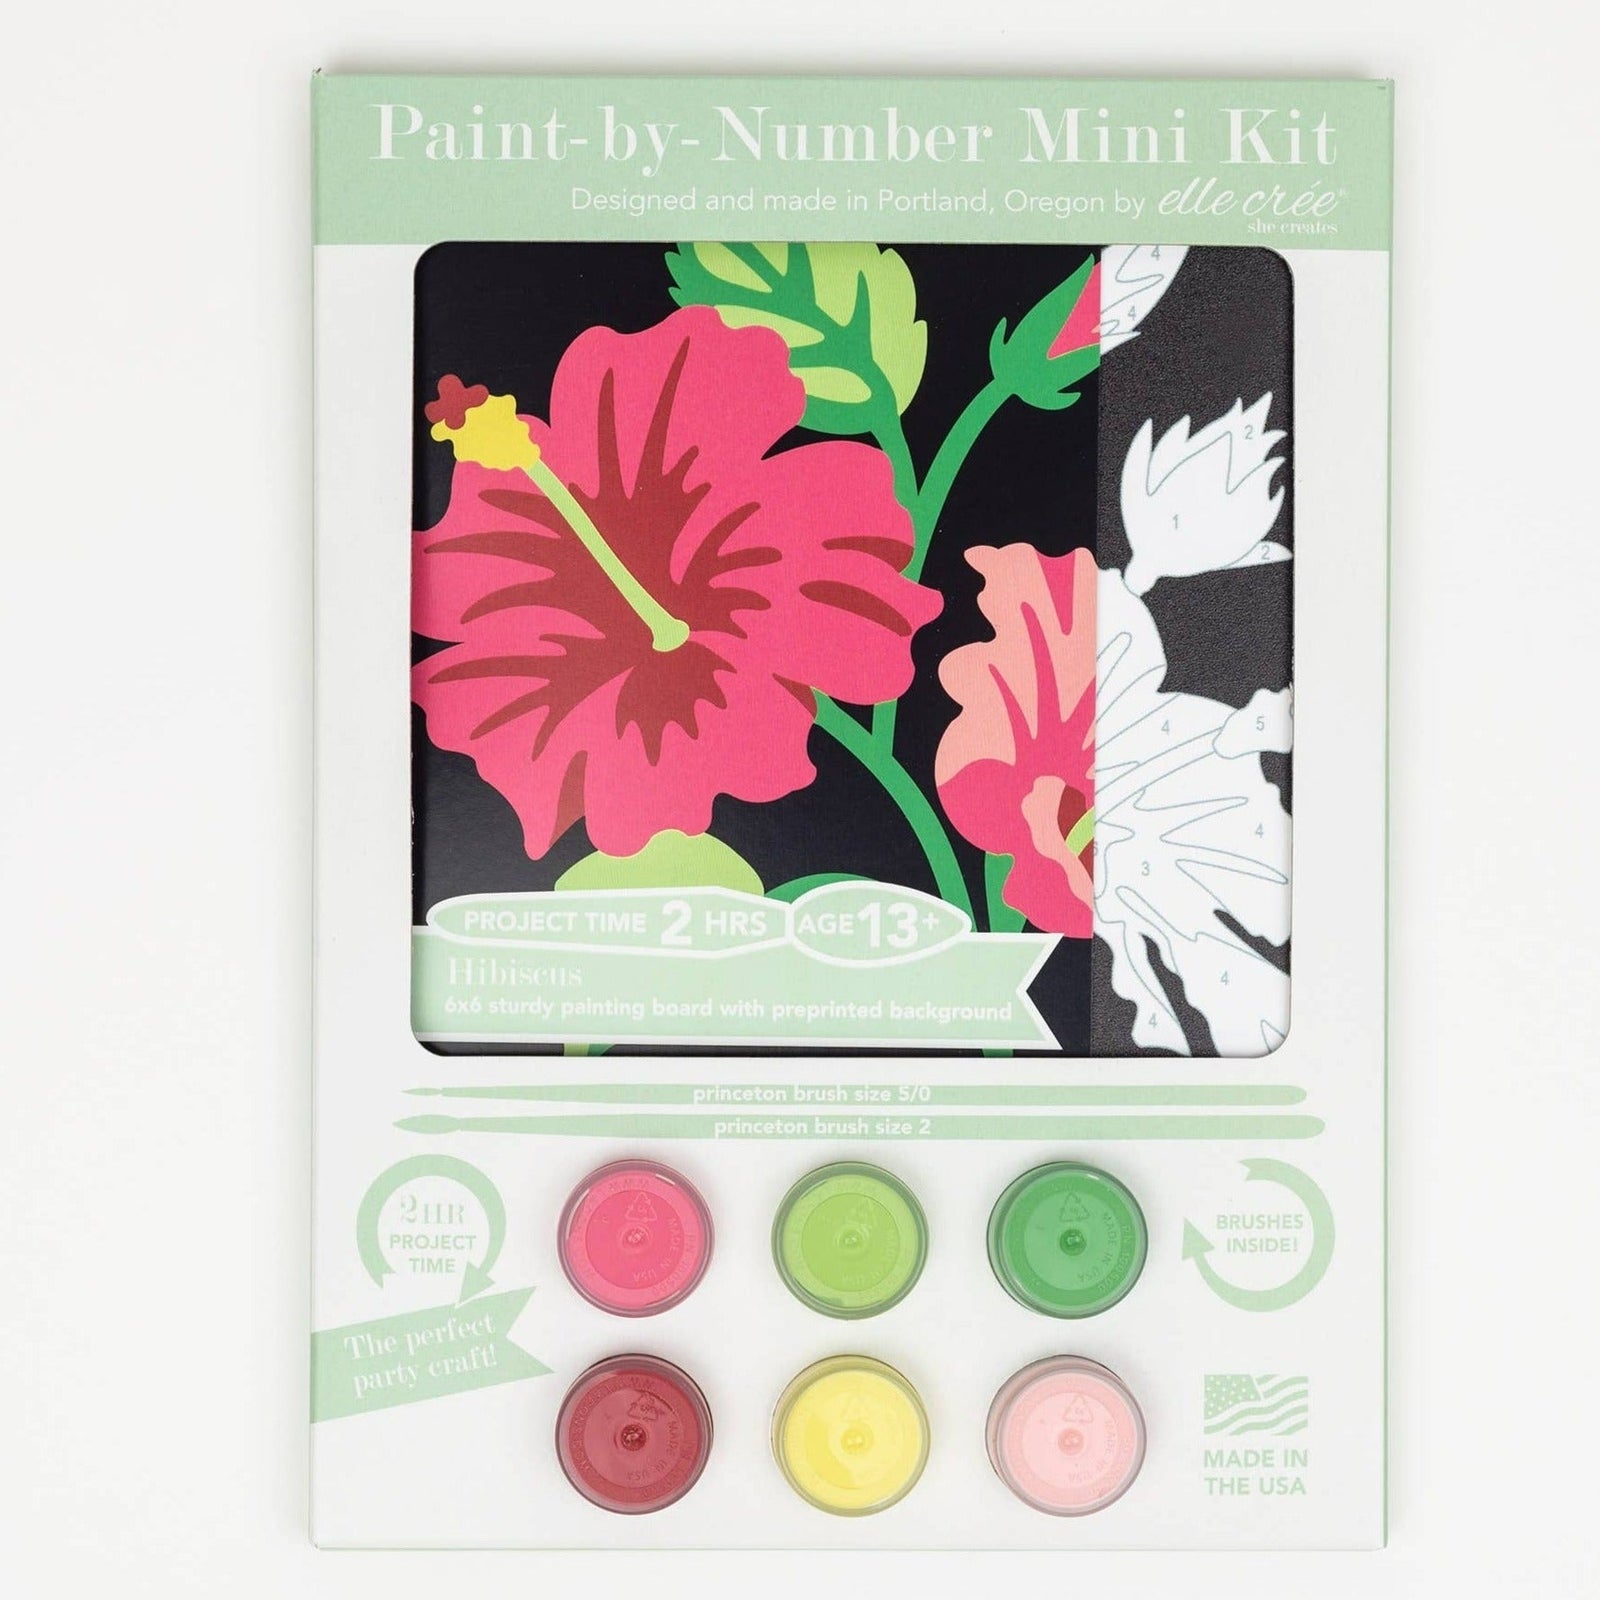 Paint-by-Number Kit - Mini - Sparrow - Gift & Gather